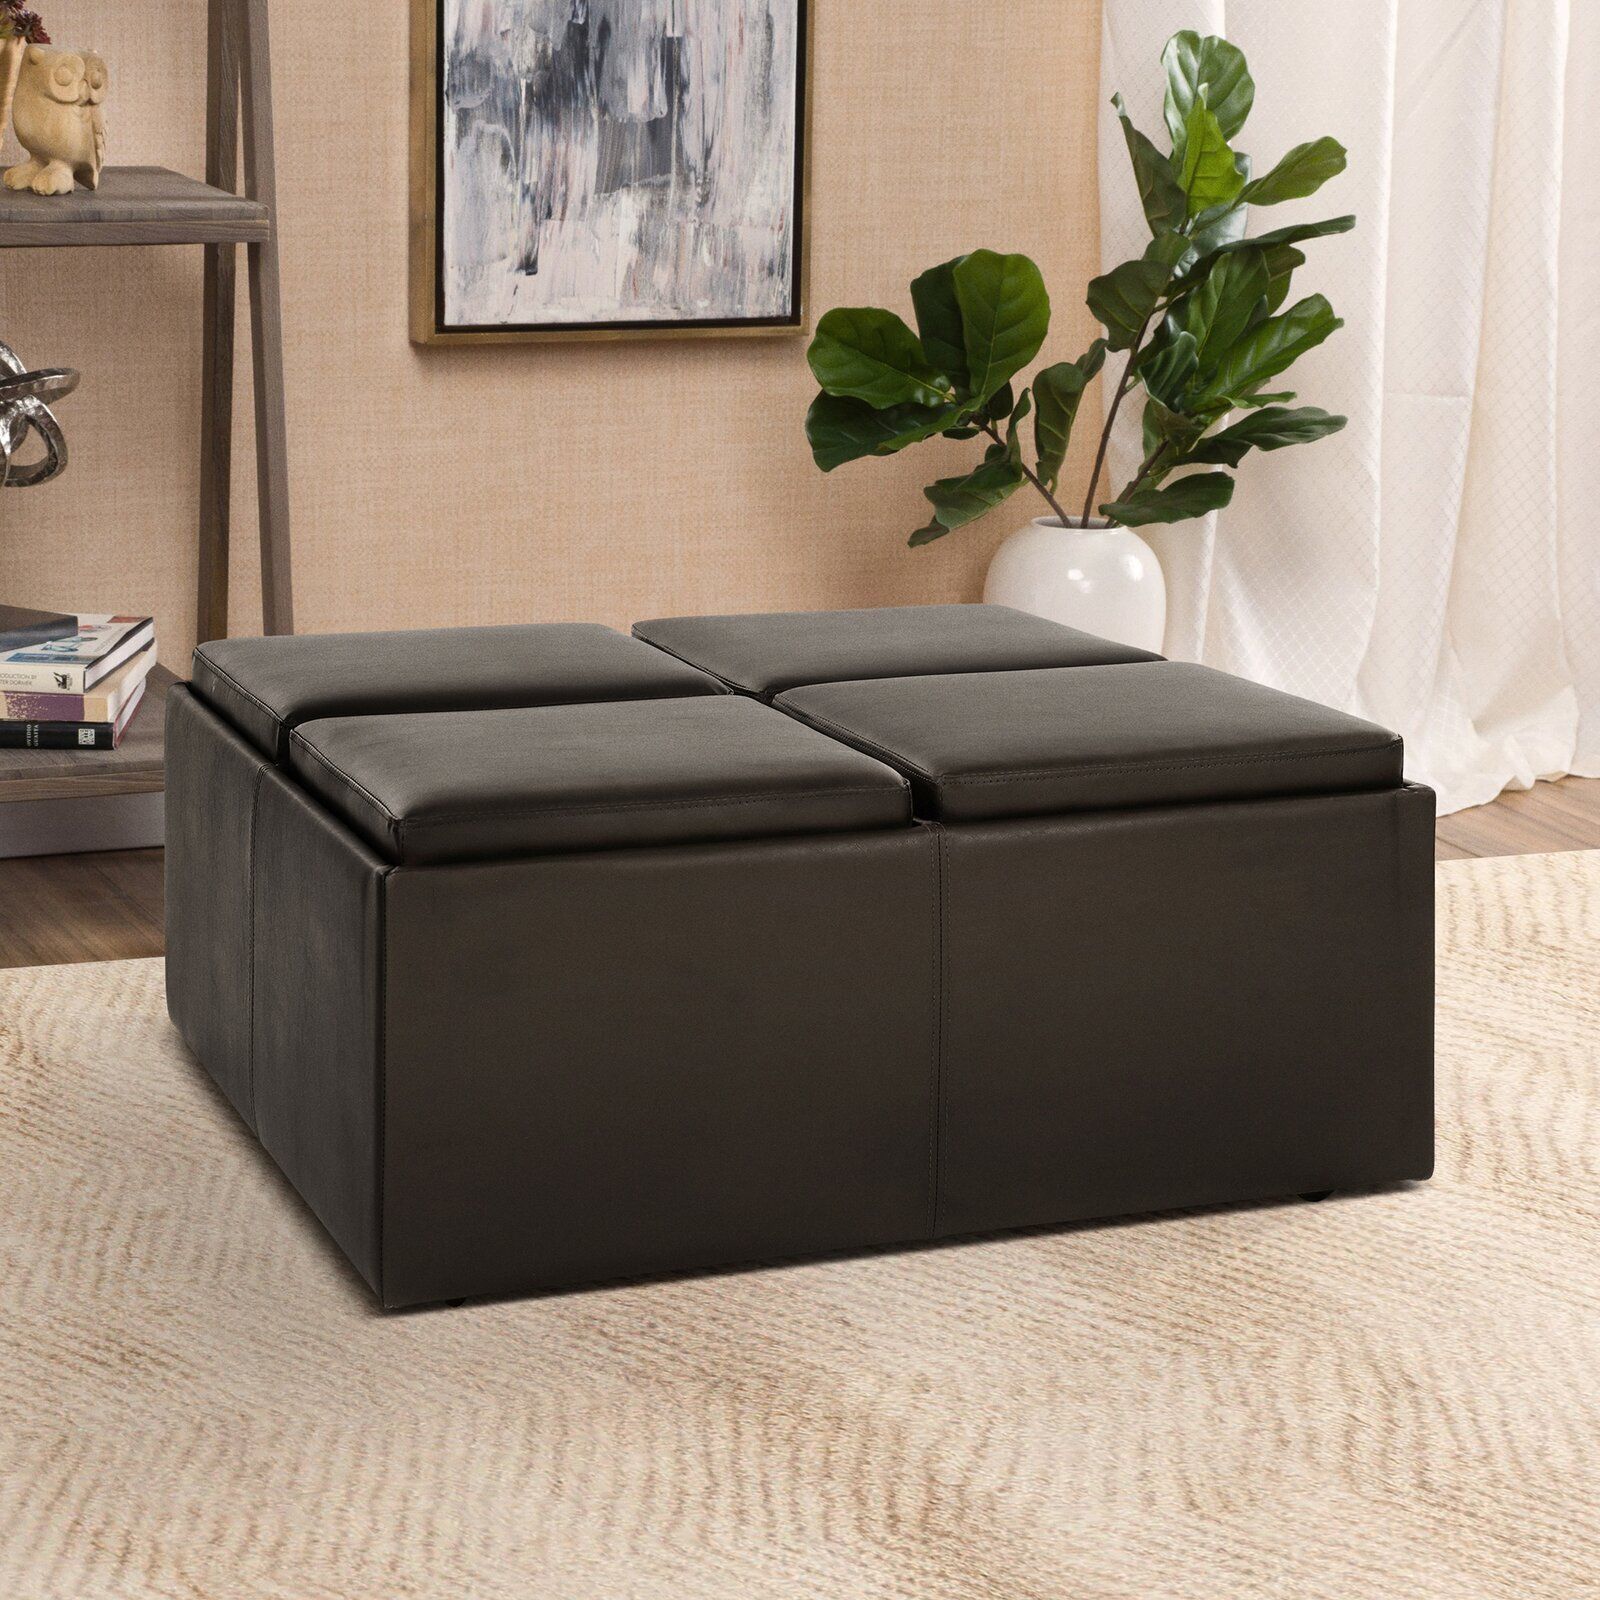 Storage Ottoman Coffee Table – Ideas On Foter Intended For Sofa Set With Storage Tray Ottoman (View 5 of 15)